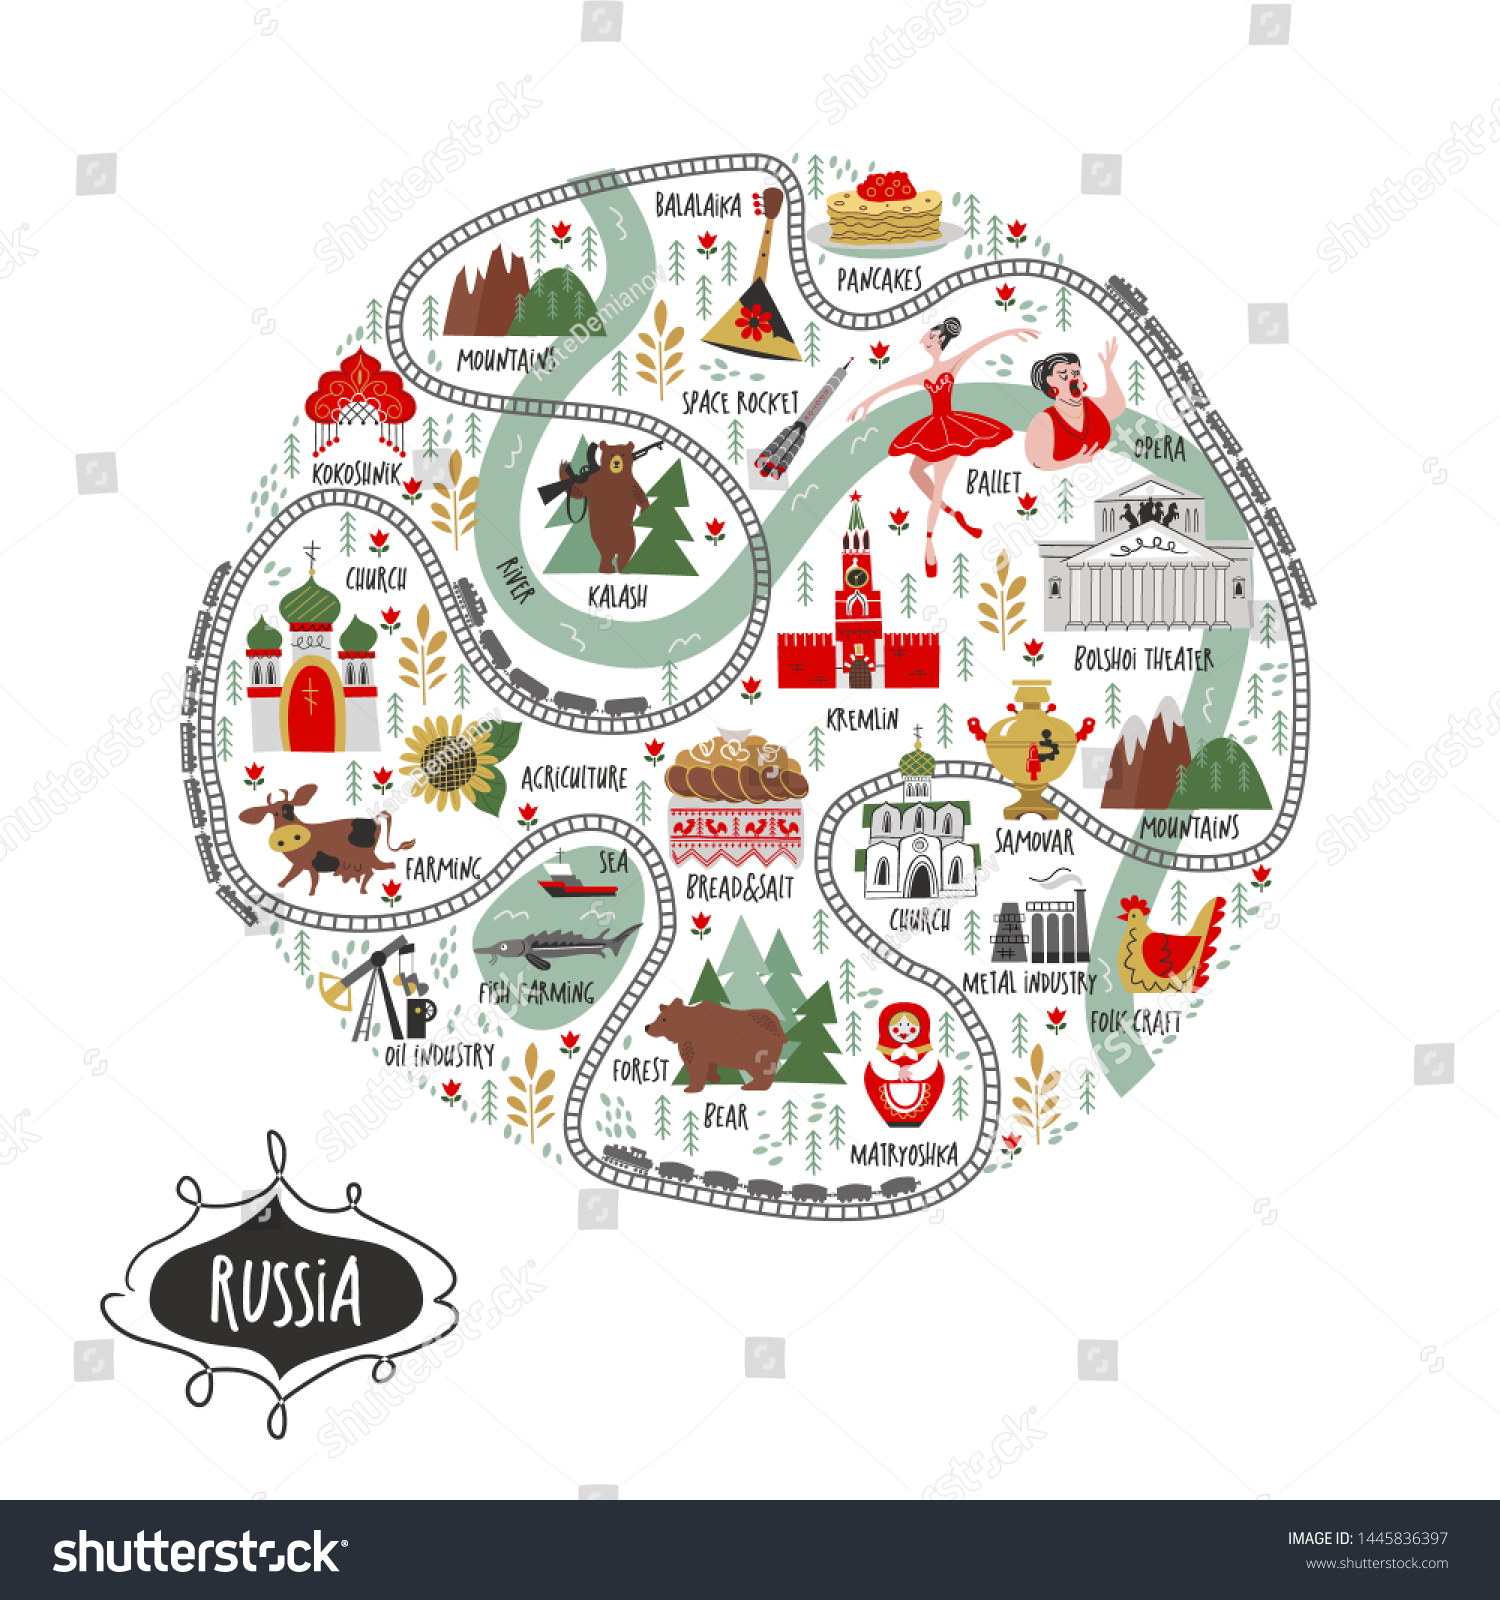 Russia Sights Russia Symbols Country Vector Stock Vector (Royalty Free